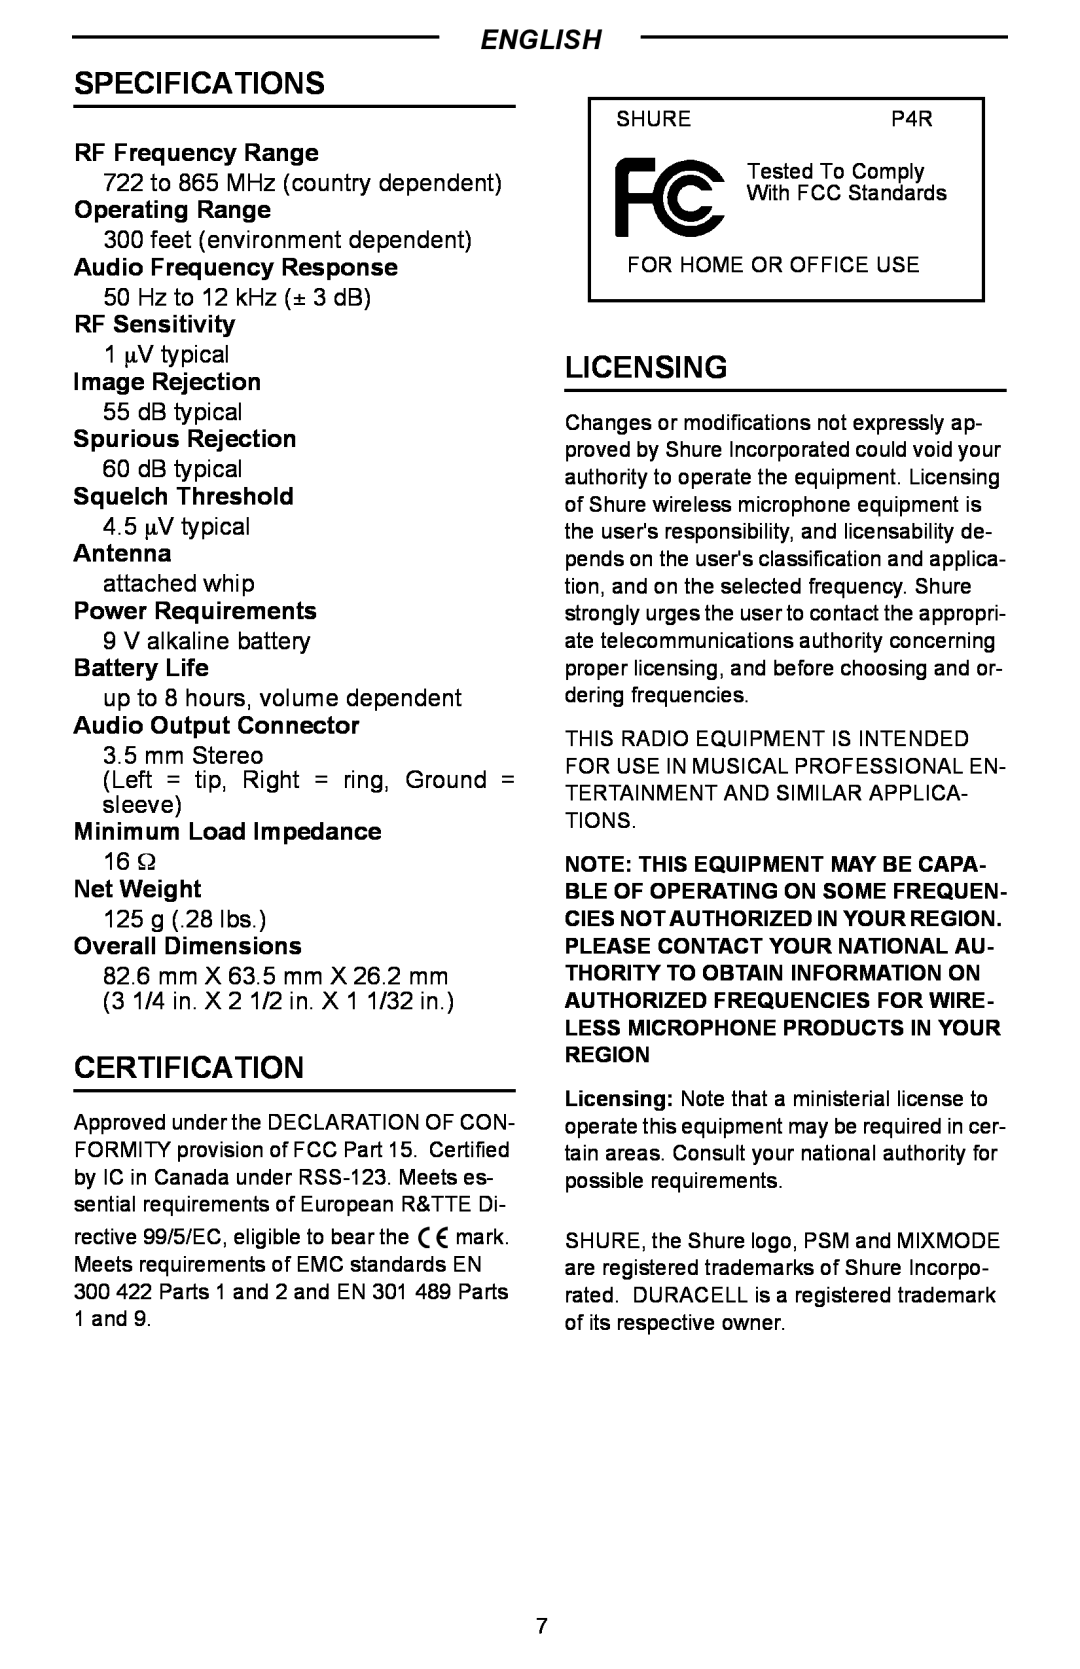 Shure P4R manual Specifications, Certification, Licensing, English 